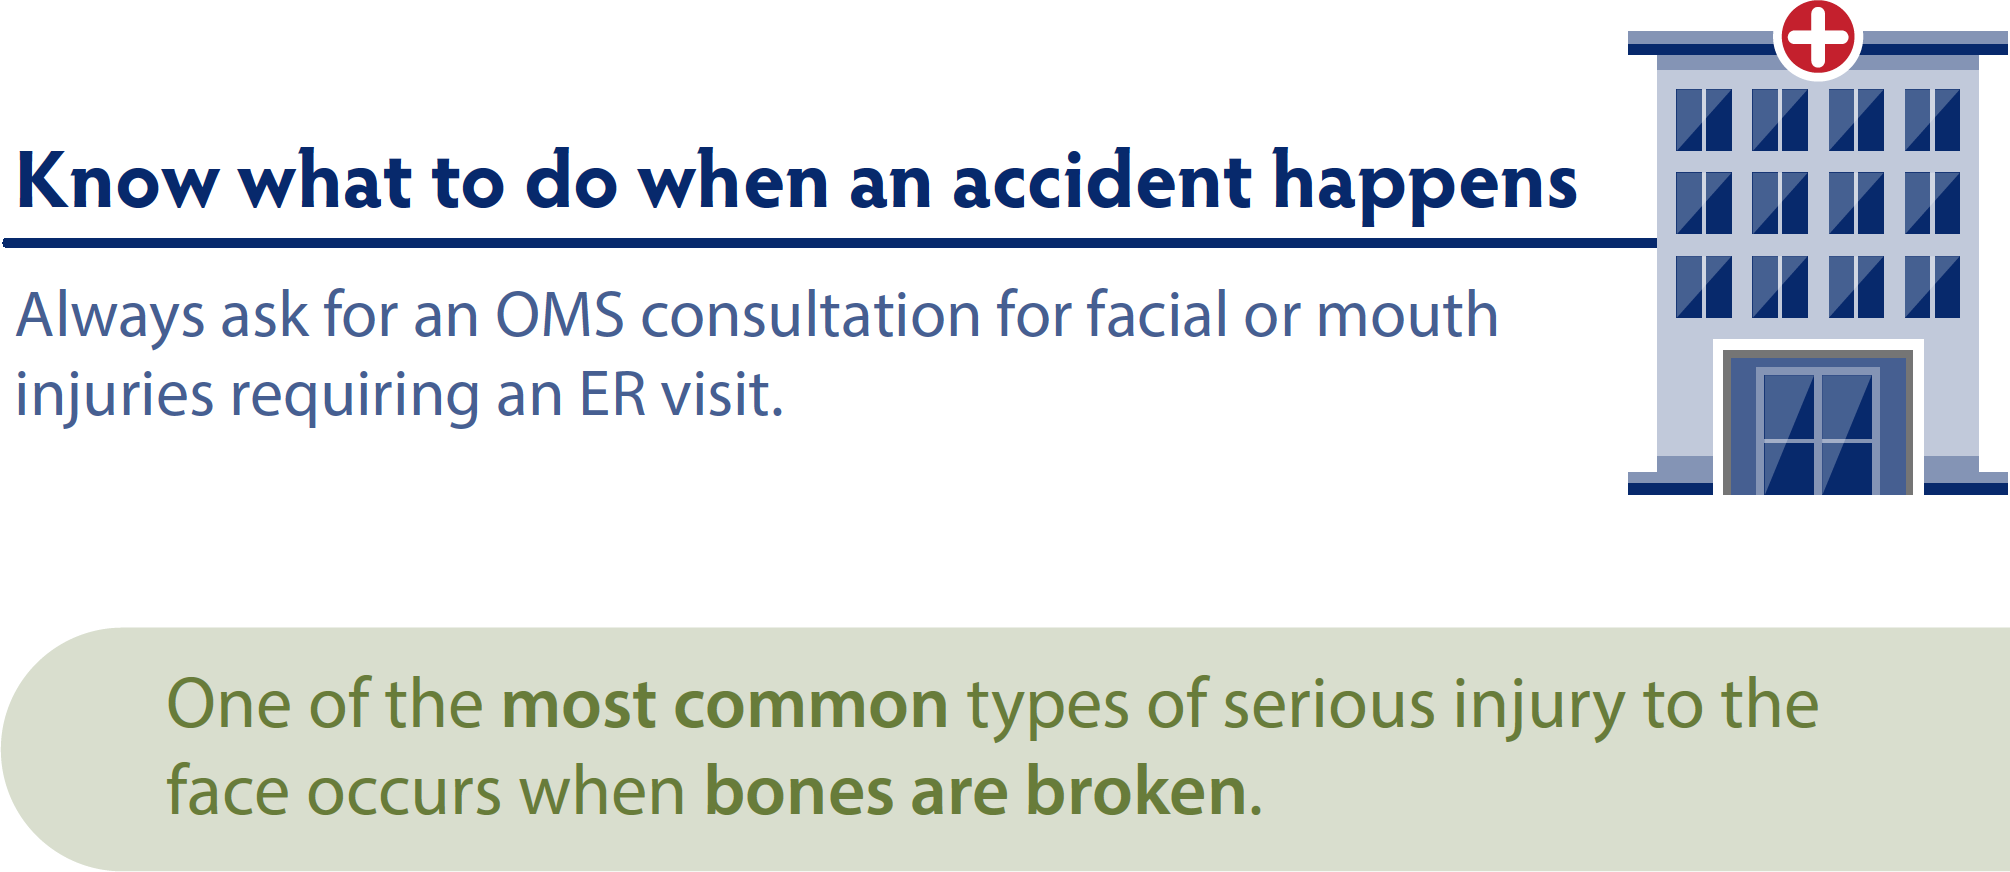 Always ask for an OMS at the ER for facial or mouth injuries